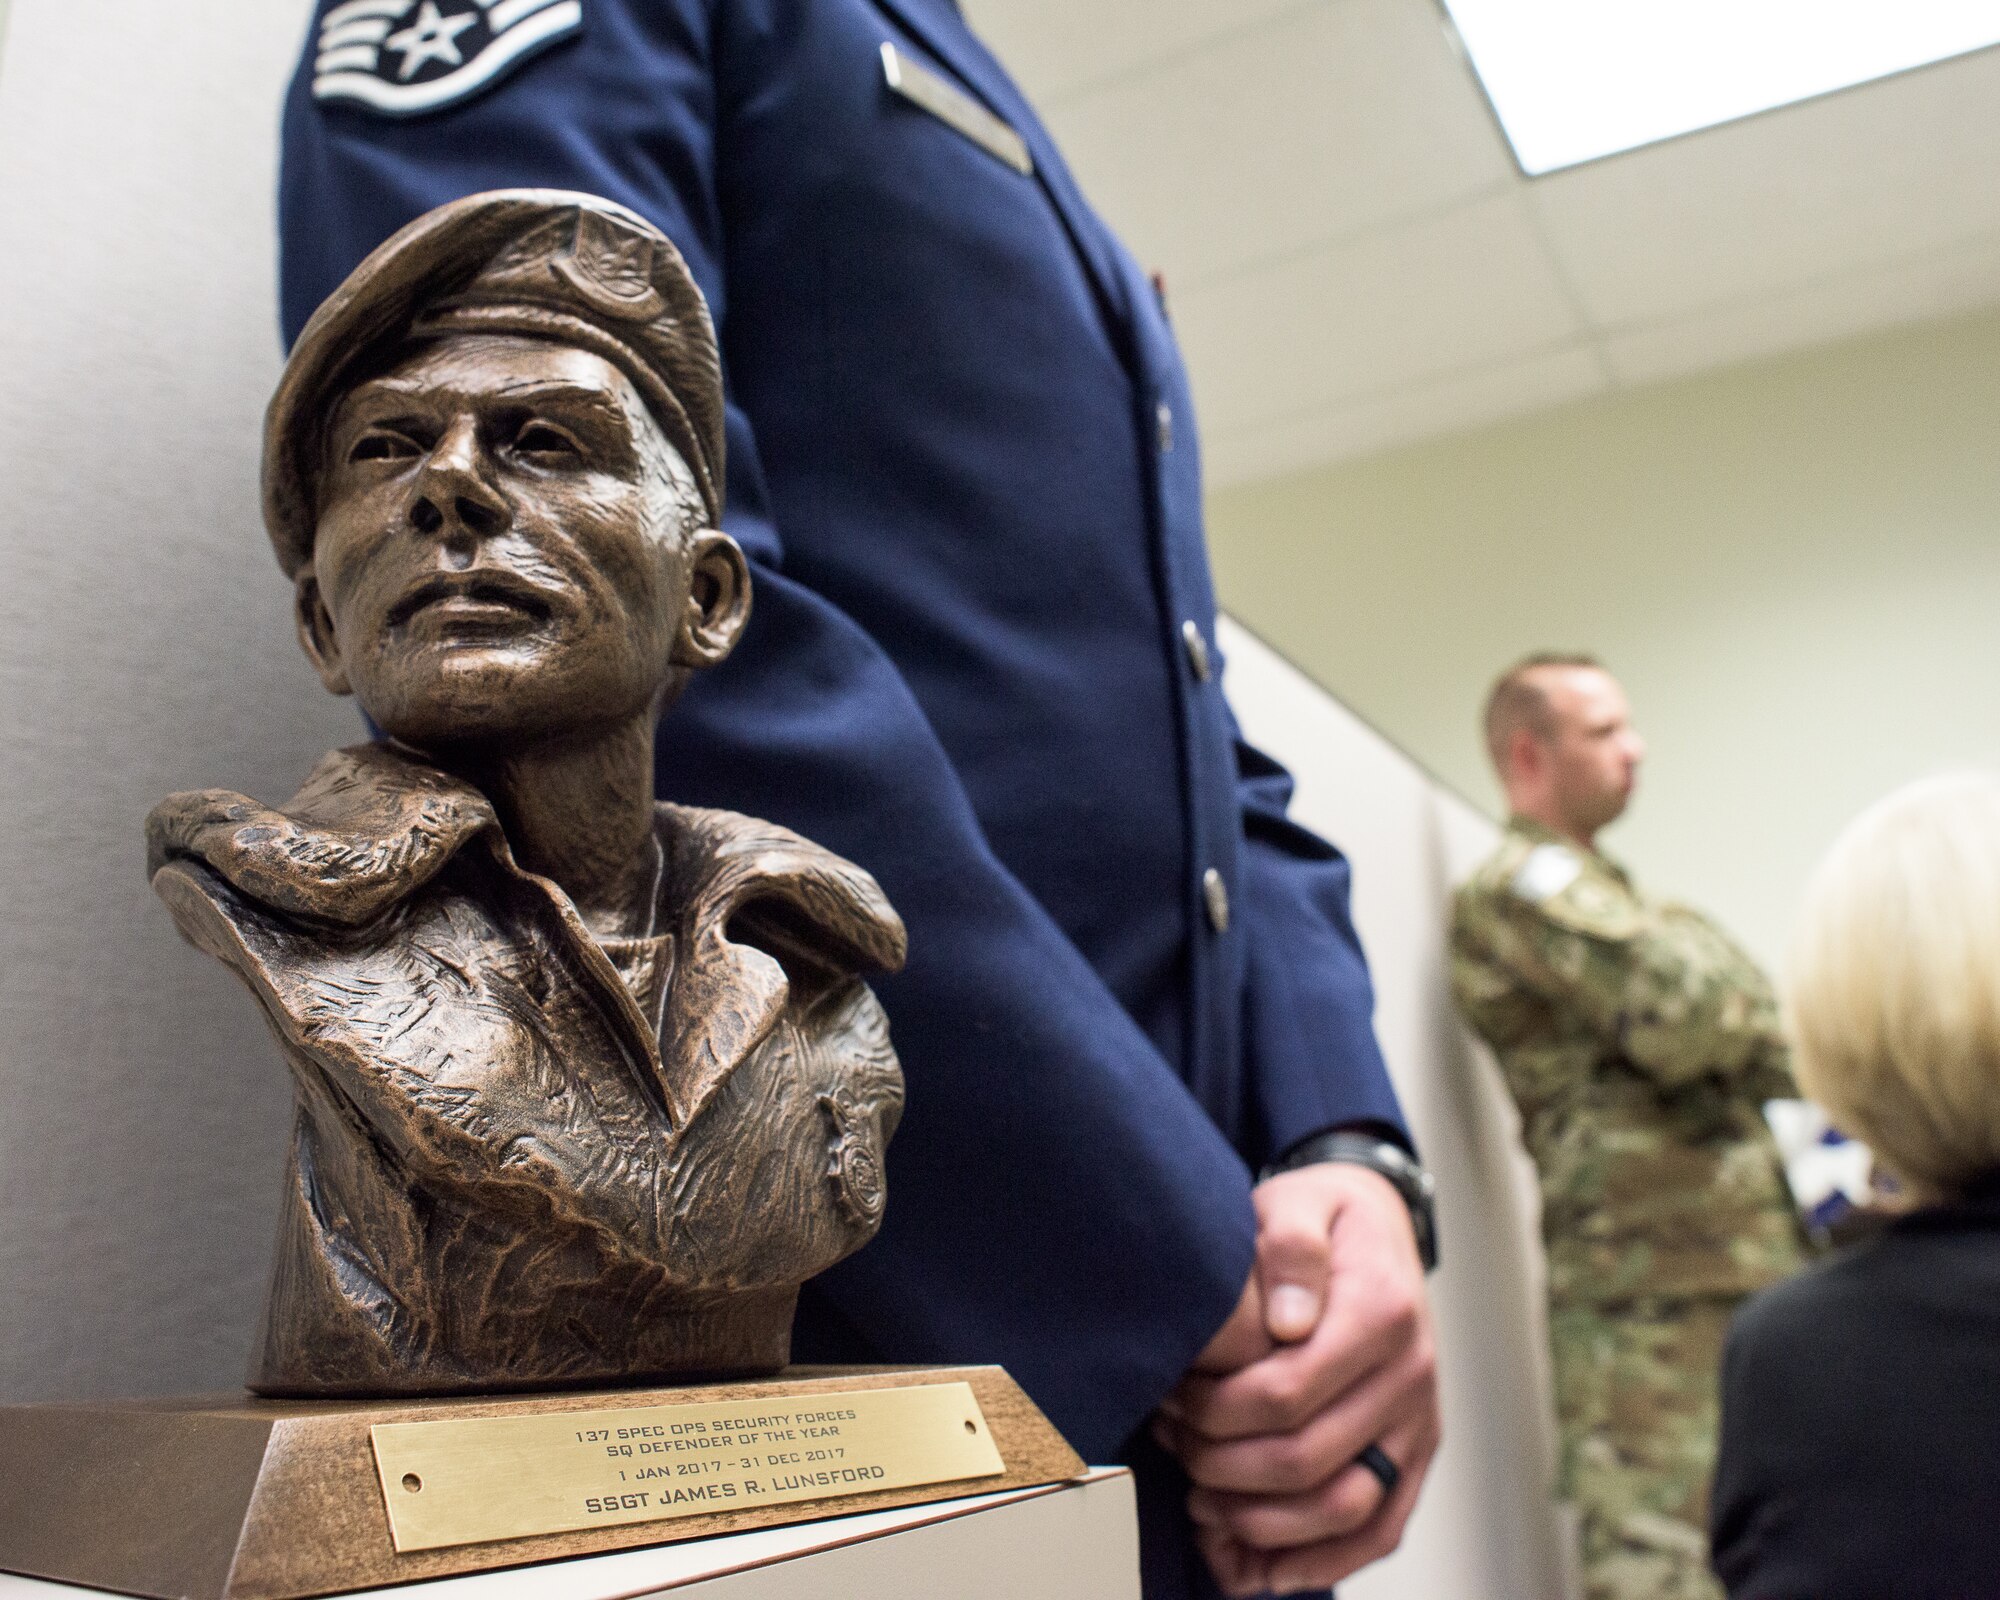 U.S. Air Force Staff Sgt. James Lunsford, 137th Special Operations Security Forces Squadron, stands beside the La Don Johnson award after receiving the honor at Will Rogers Air National Guard Base, Feb. 3, 2018. The La Don Johnson award is given by fellow security forces airmen for continued excellence during everyday duties. (U.S. Air National Guard photo by Tech. Sgt. Caroline Essex)